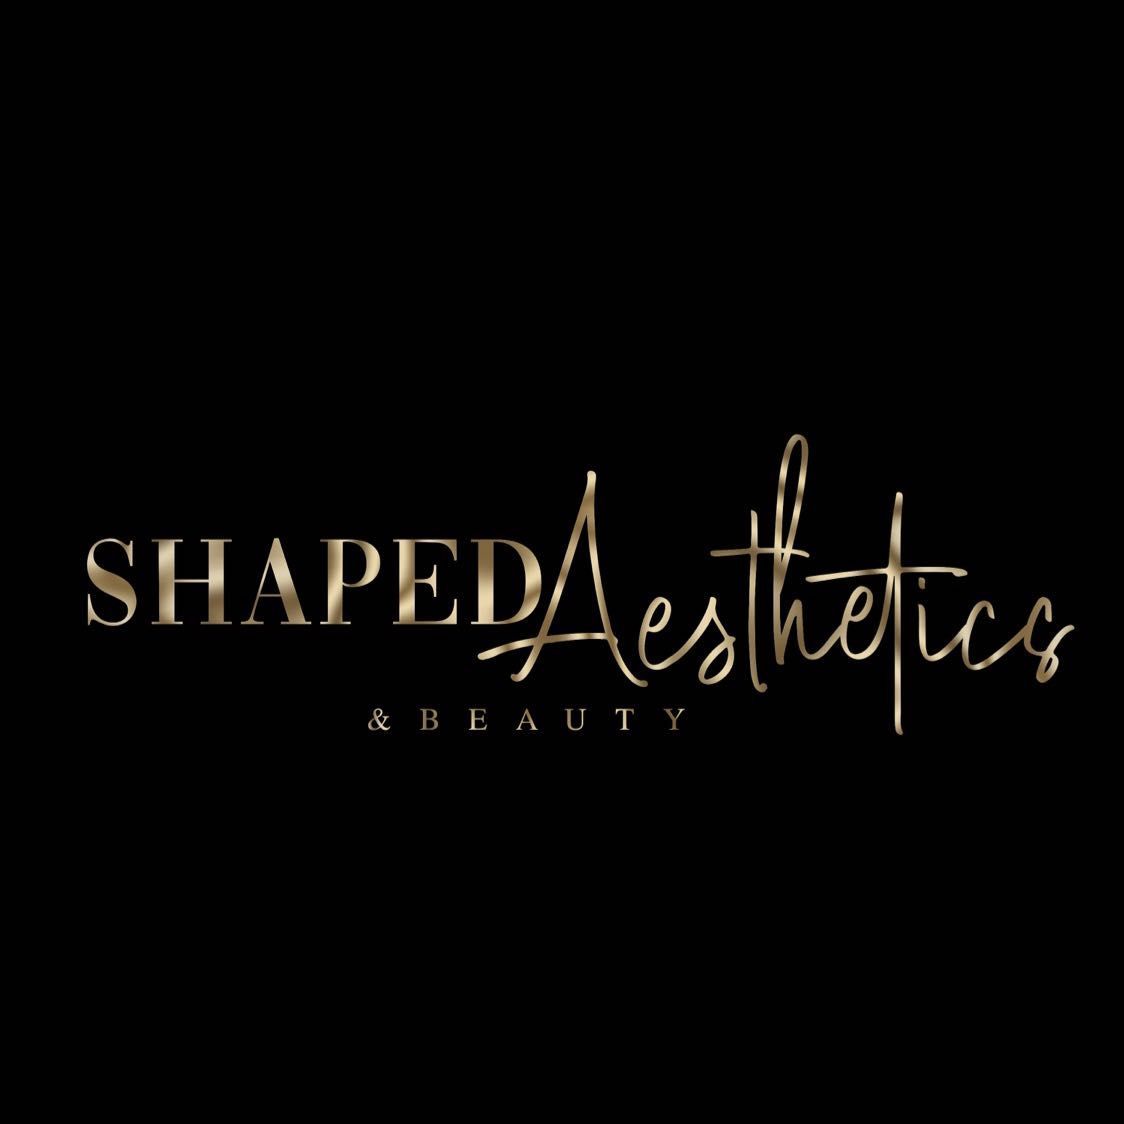 Shaped Aesthetics, 52 Brook Street, Jades hair and beauty boutique, CH1 3DN, Chester